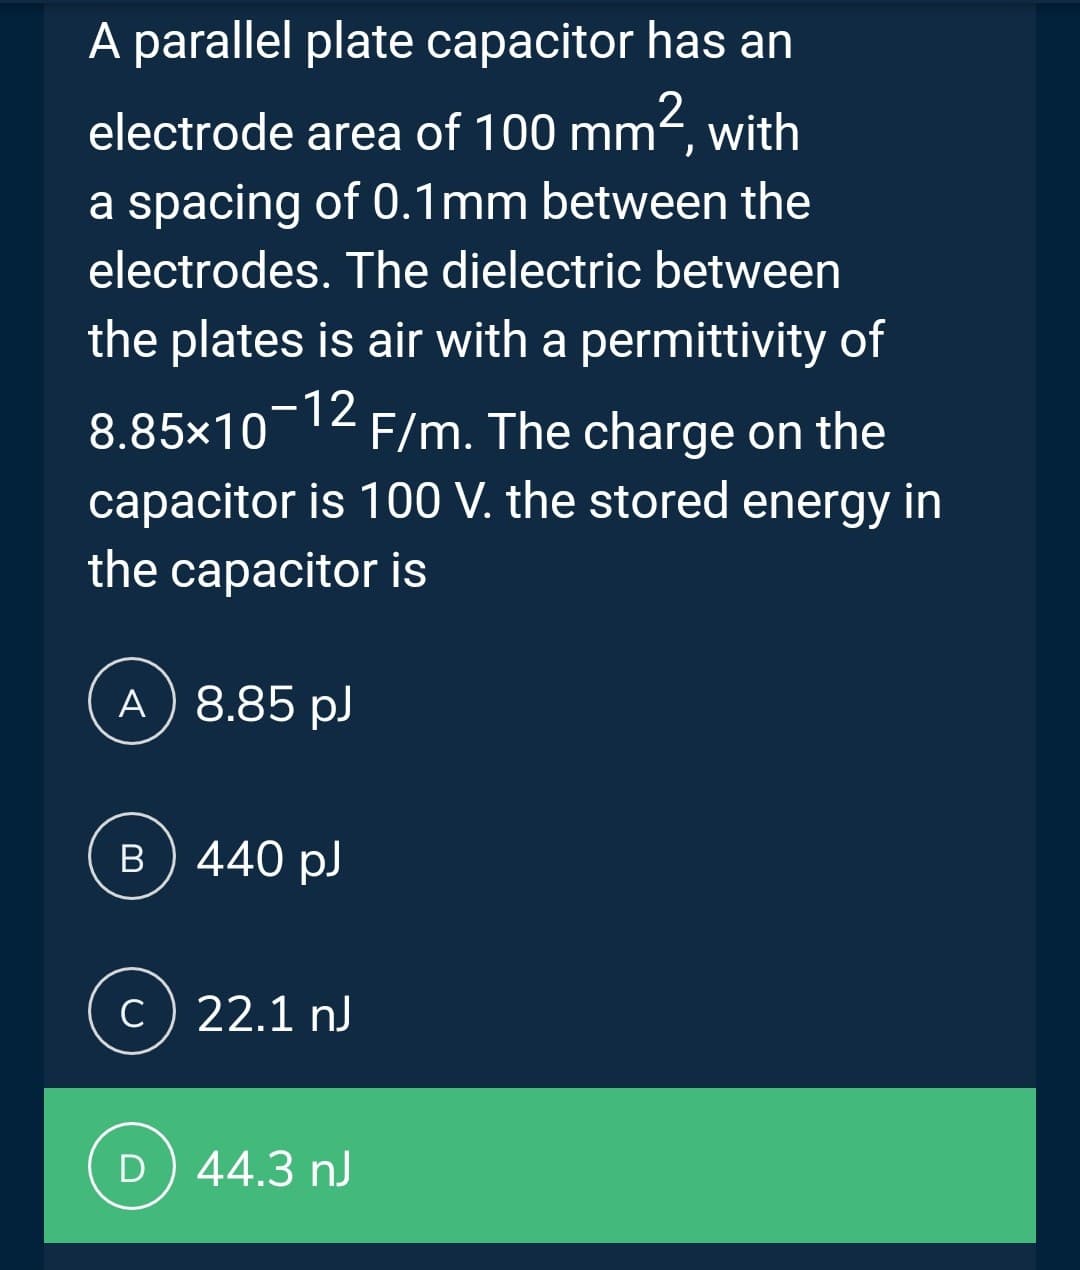 2
A parallel plate capacitor has an
electrode area of 100 mm², with
a spacing of 0.1mm between the
electrodes. The dielectric between
the plates is air with a permittivity of
8.85×10-12
F/m. The charge on the
capacitor is 100 V. the stored energy in
the capacitor is
A) 8.85 pJ
B) 440 pJ
c) 22.1 nJ
D) 44.3 nJ